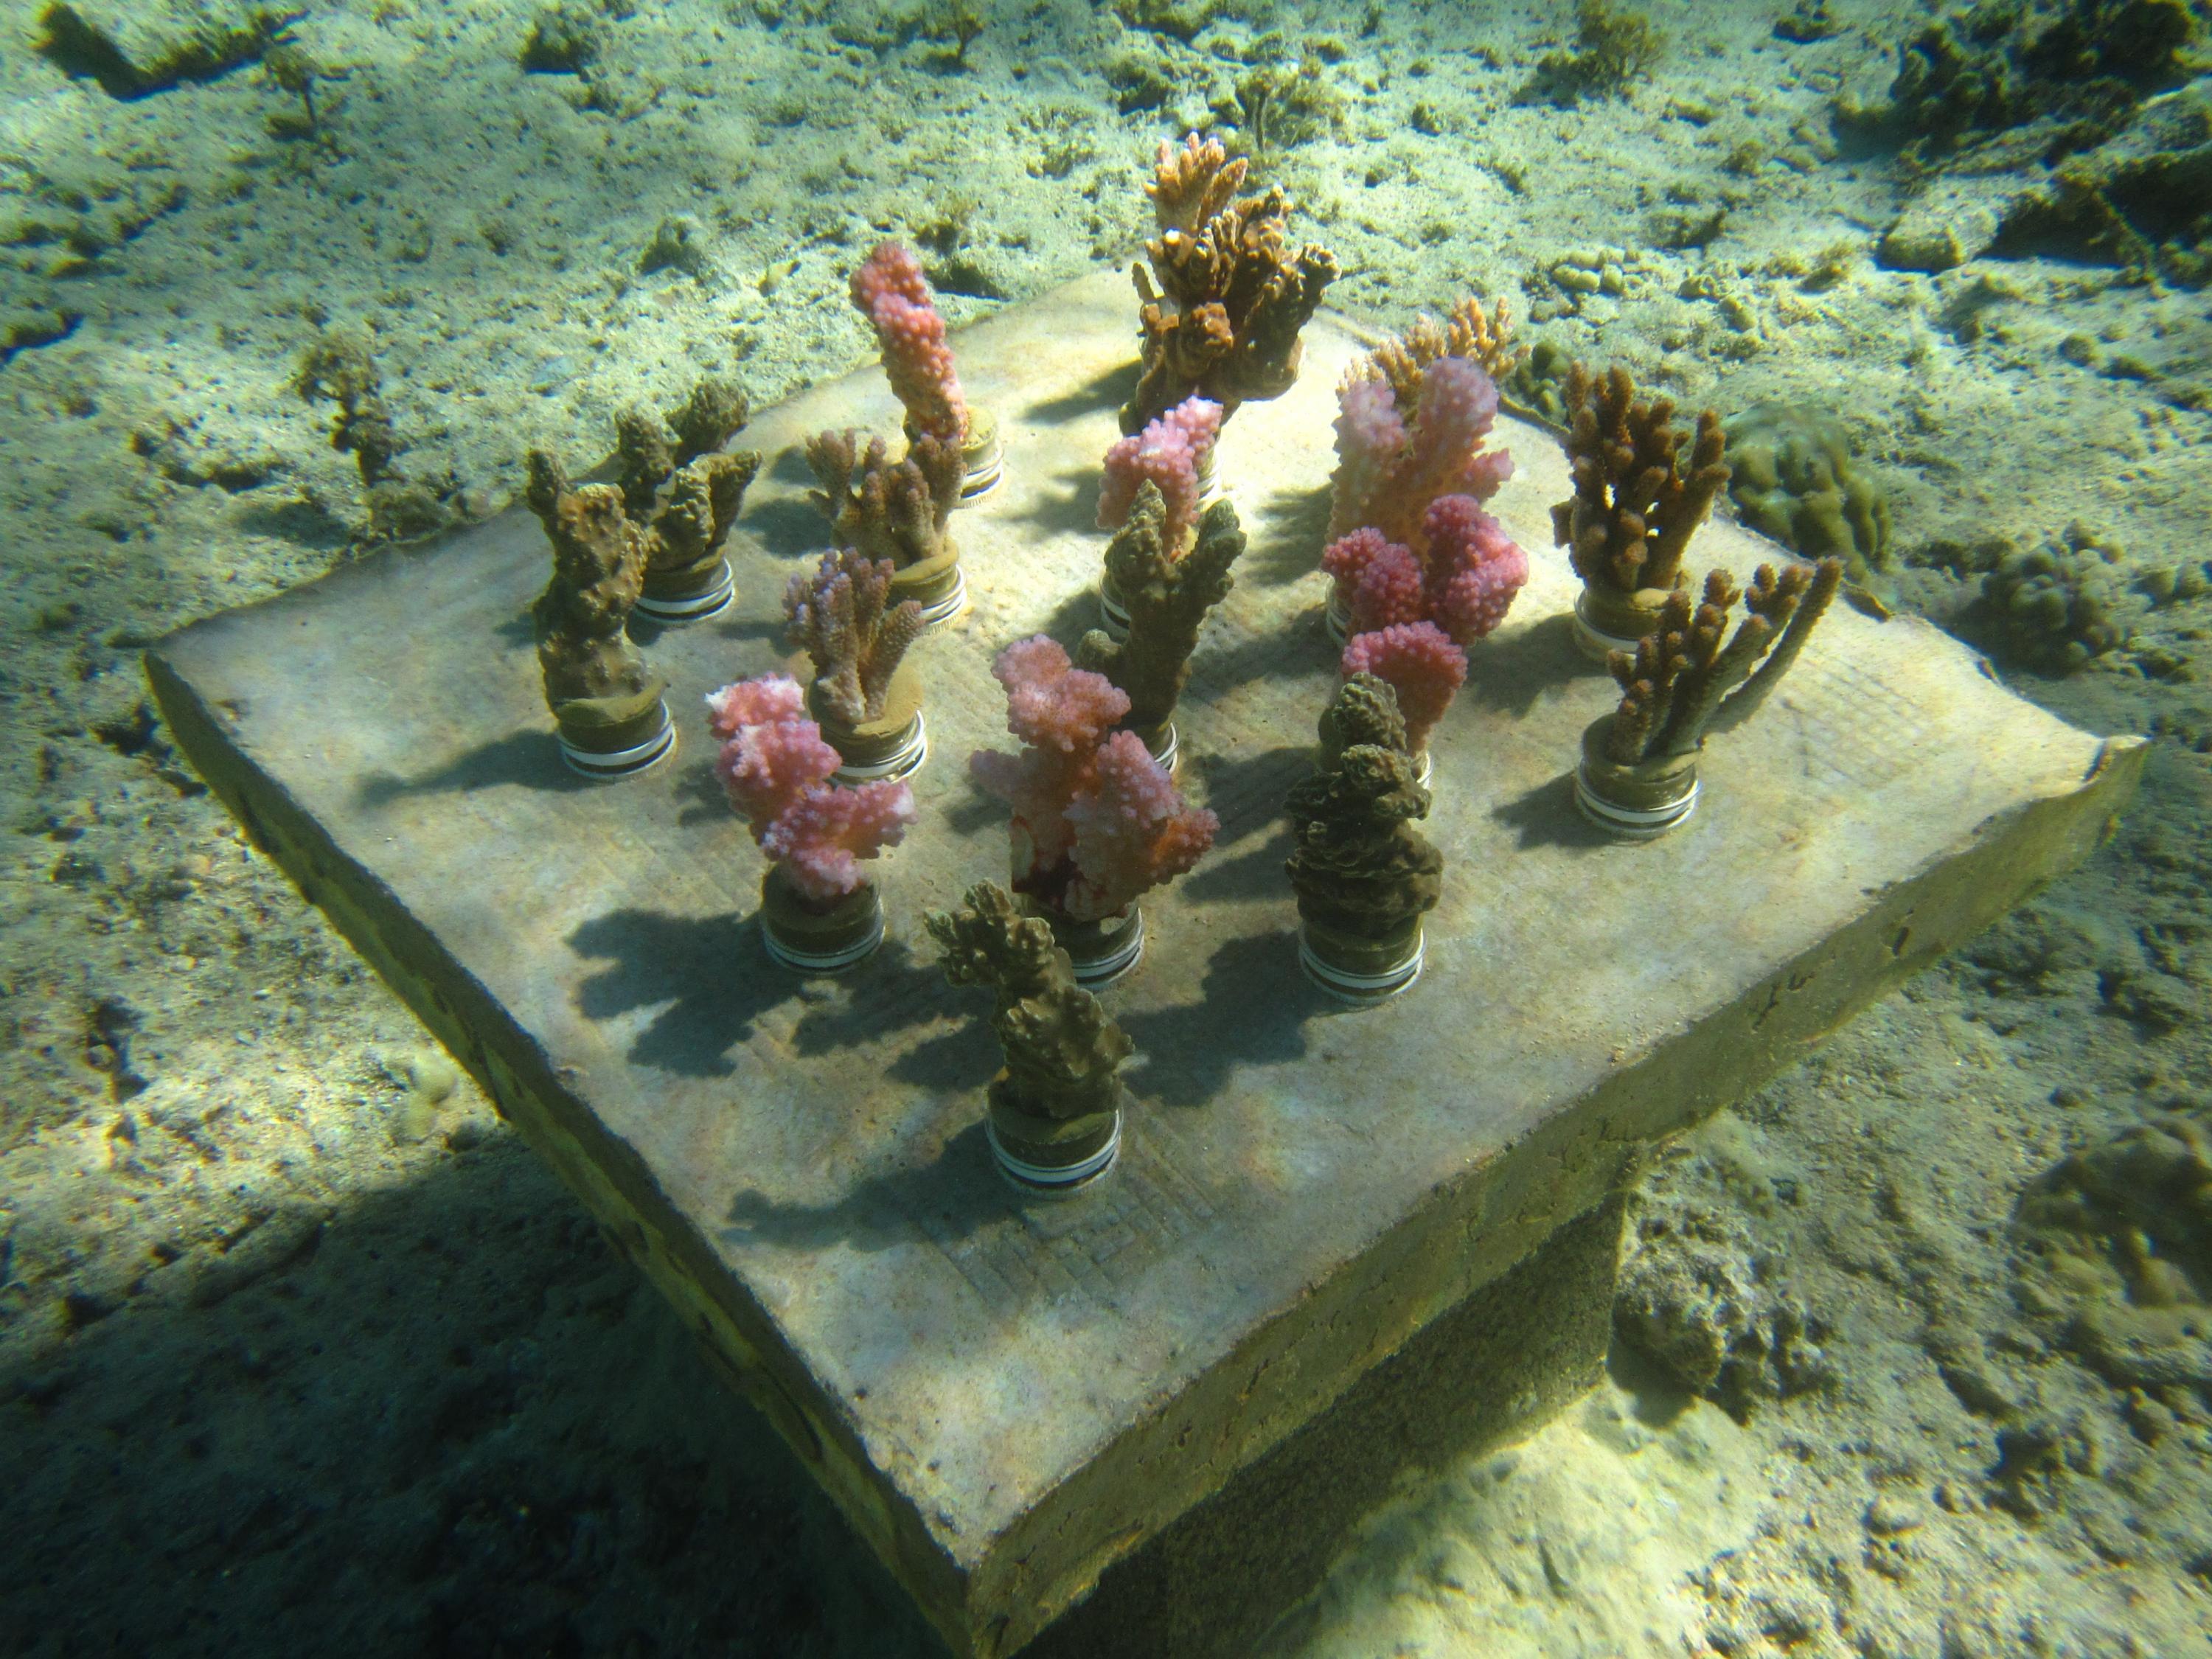 A variety of coral species growing in Georgia Tech's underwater reef garden near Mo'orea, French Polynesia. (Photo Cody Clements)